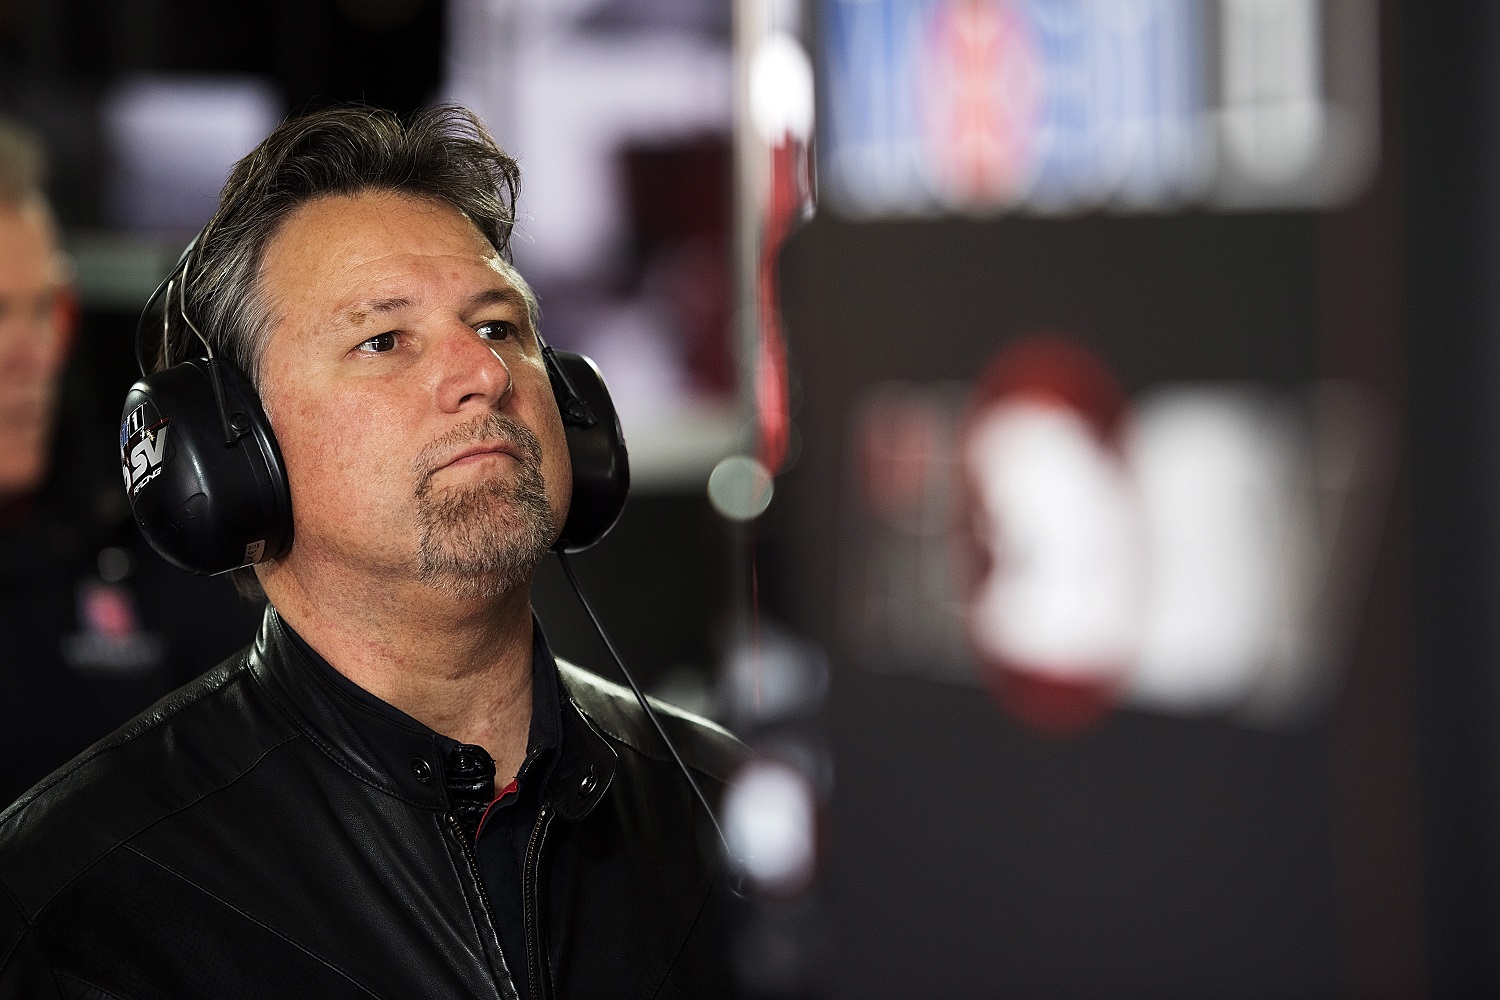 Michael Andretti of Andretti Autosport looks on during practice ahead of the Bathurst 1000, which is part of the Supercars Championship at Mount Panorama on Oct. 6, 2017, in Bathurst, Australia.